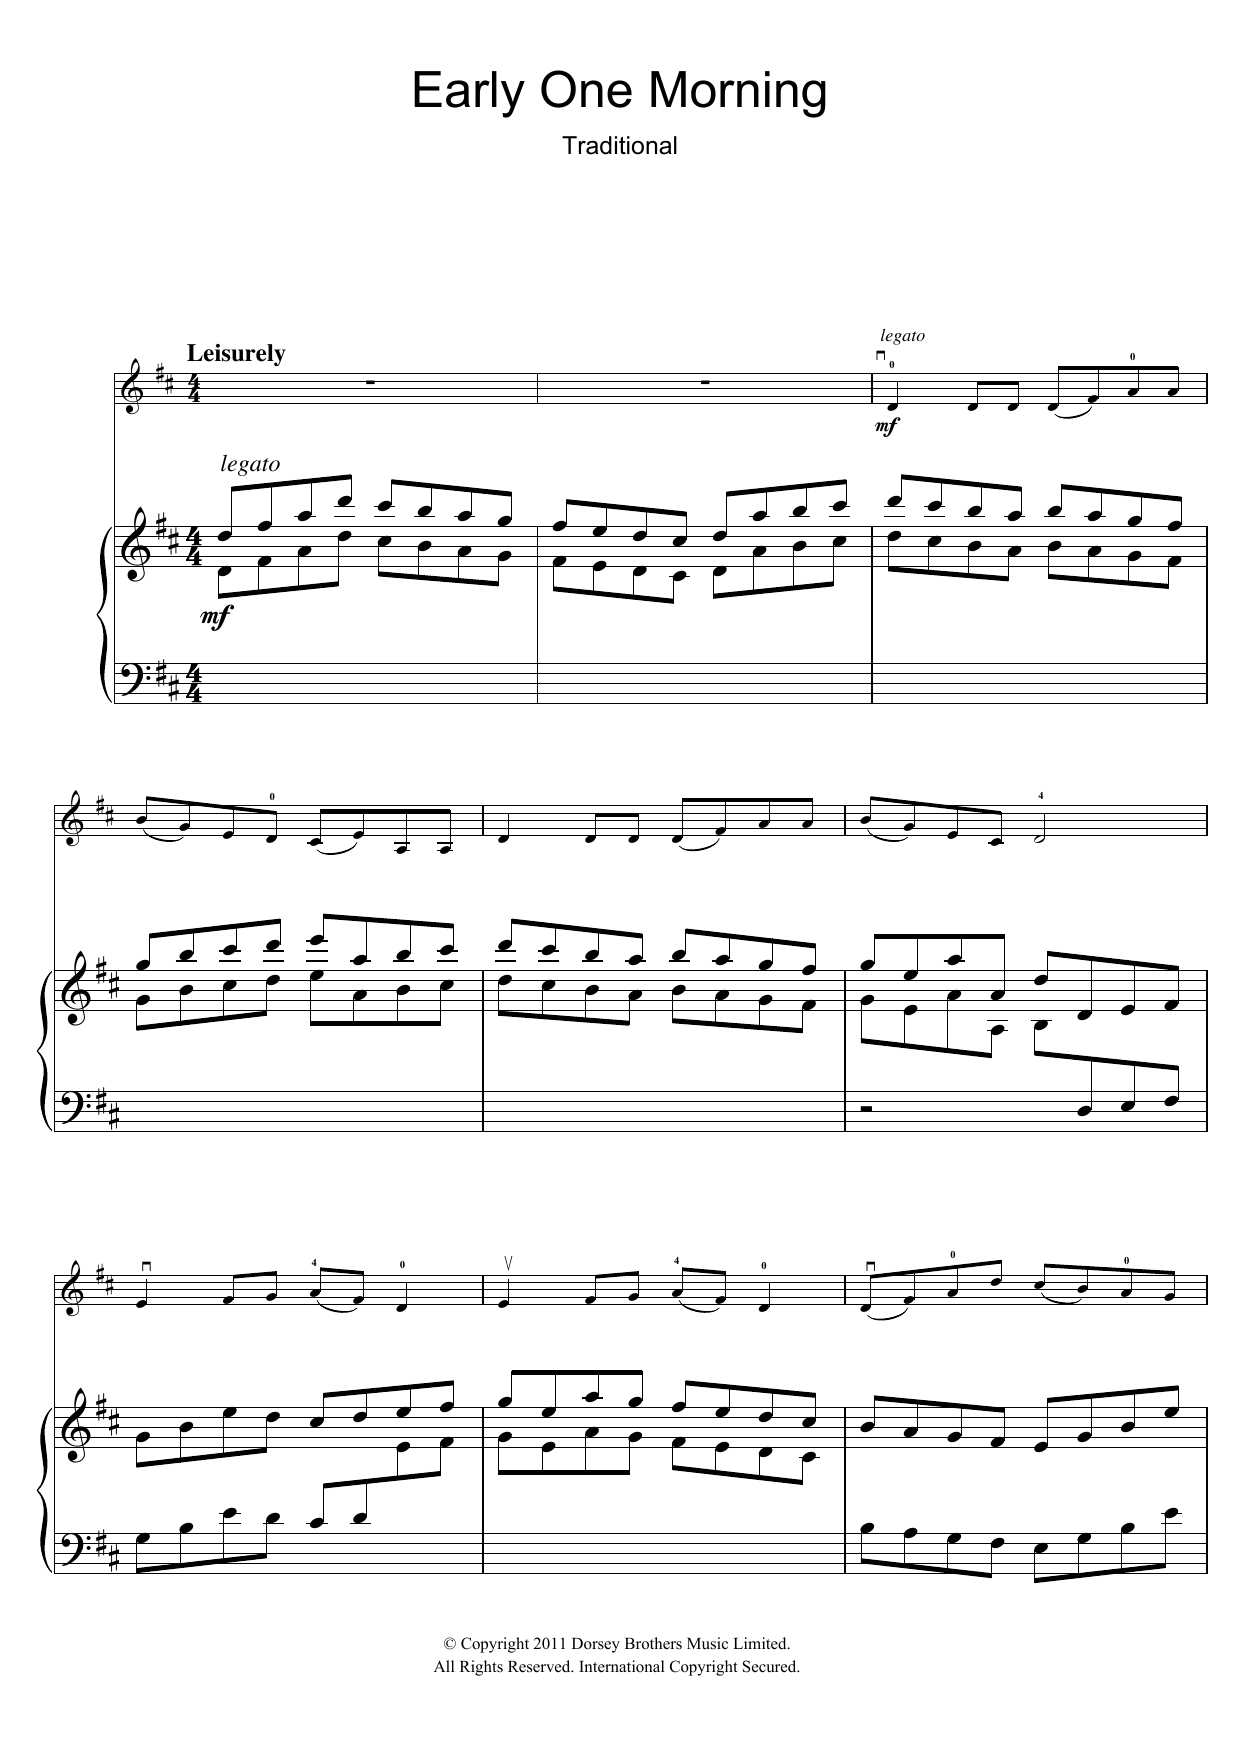 Download Traditional Early One Morning Sheet Music